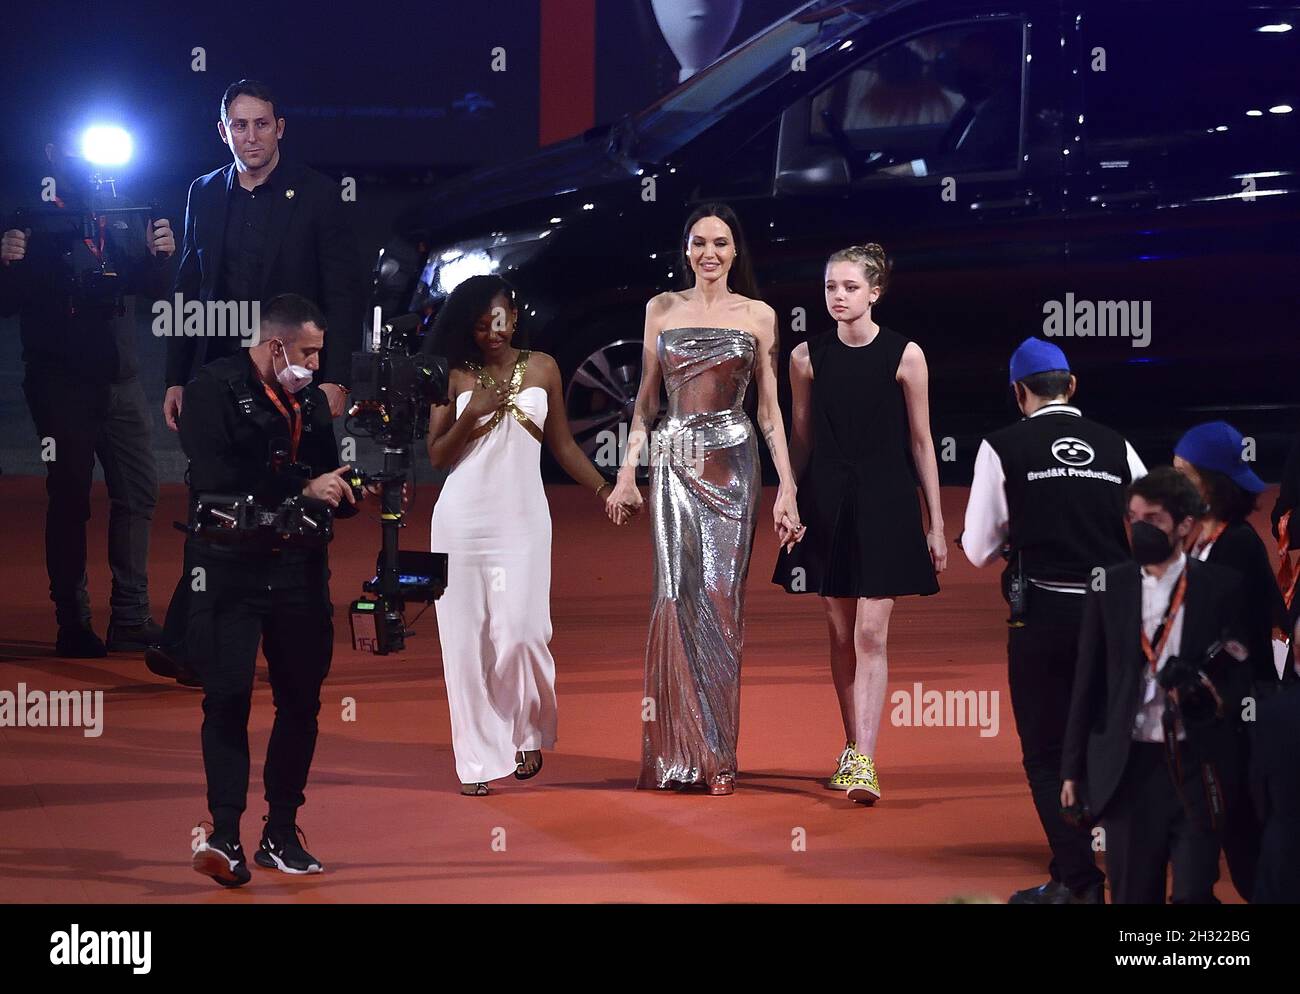 Rome, Italy. 24th Oct, 2021. Zahara Marley Jolie-Pitt, Angelina Jolie, and Shiloh Jolie-Pitt attend the red carpet of the movie 'Eternals' during the 16th Rome Film Fest 2021 on Sunday, October 24, 2021 in Rome, Italy. Photo by Rocco Spaziani/UPI Credit: UPI/Alamy Live News Stock Photo